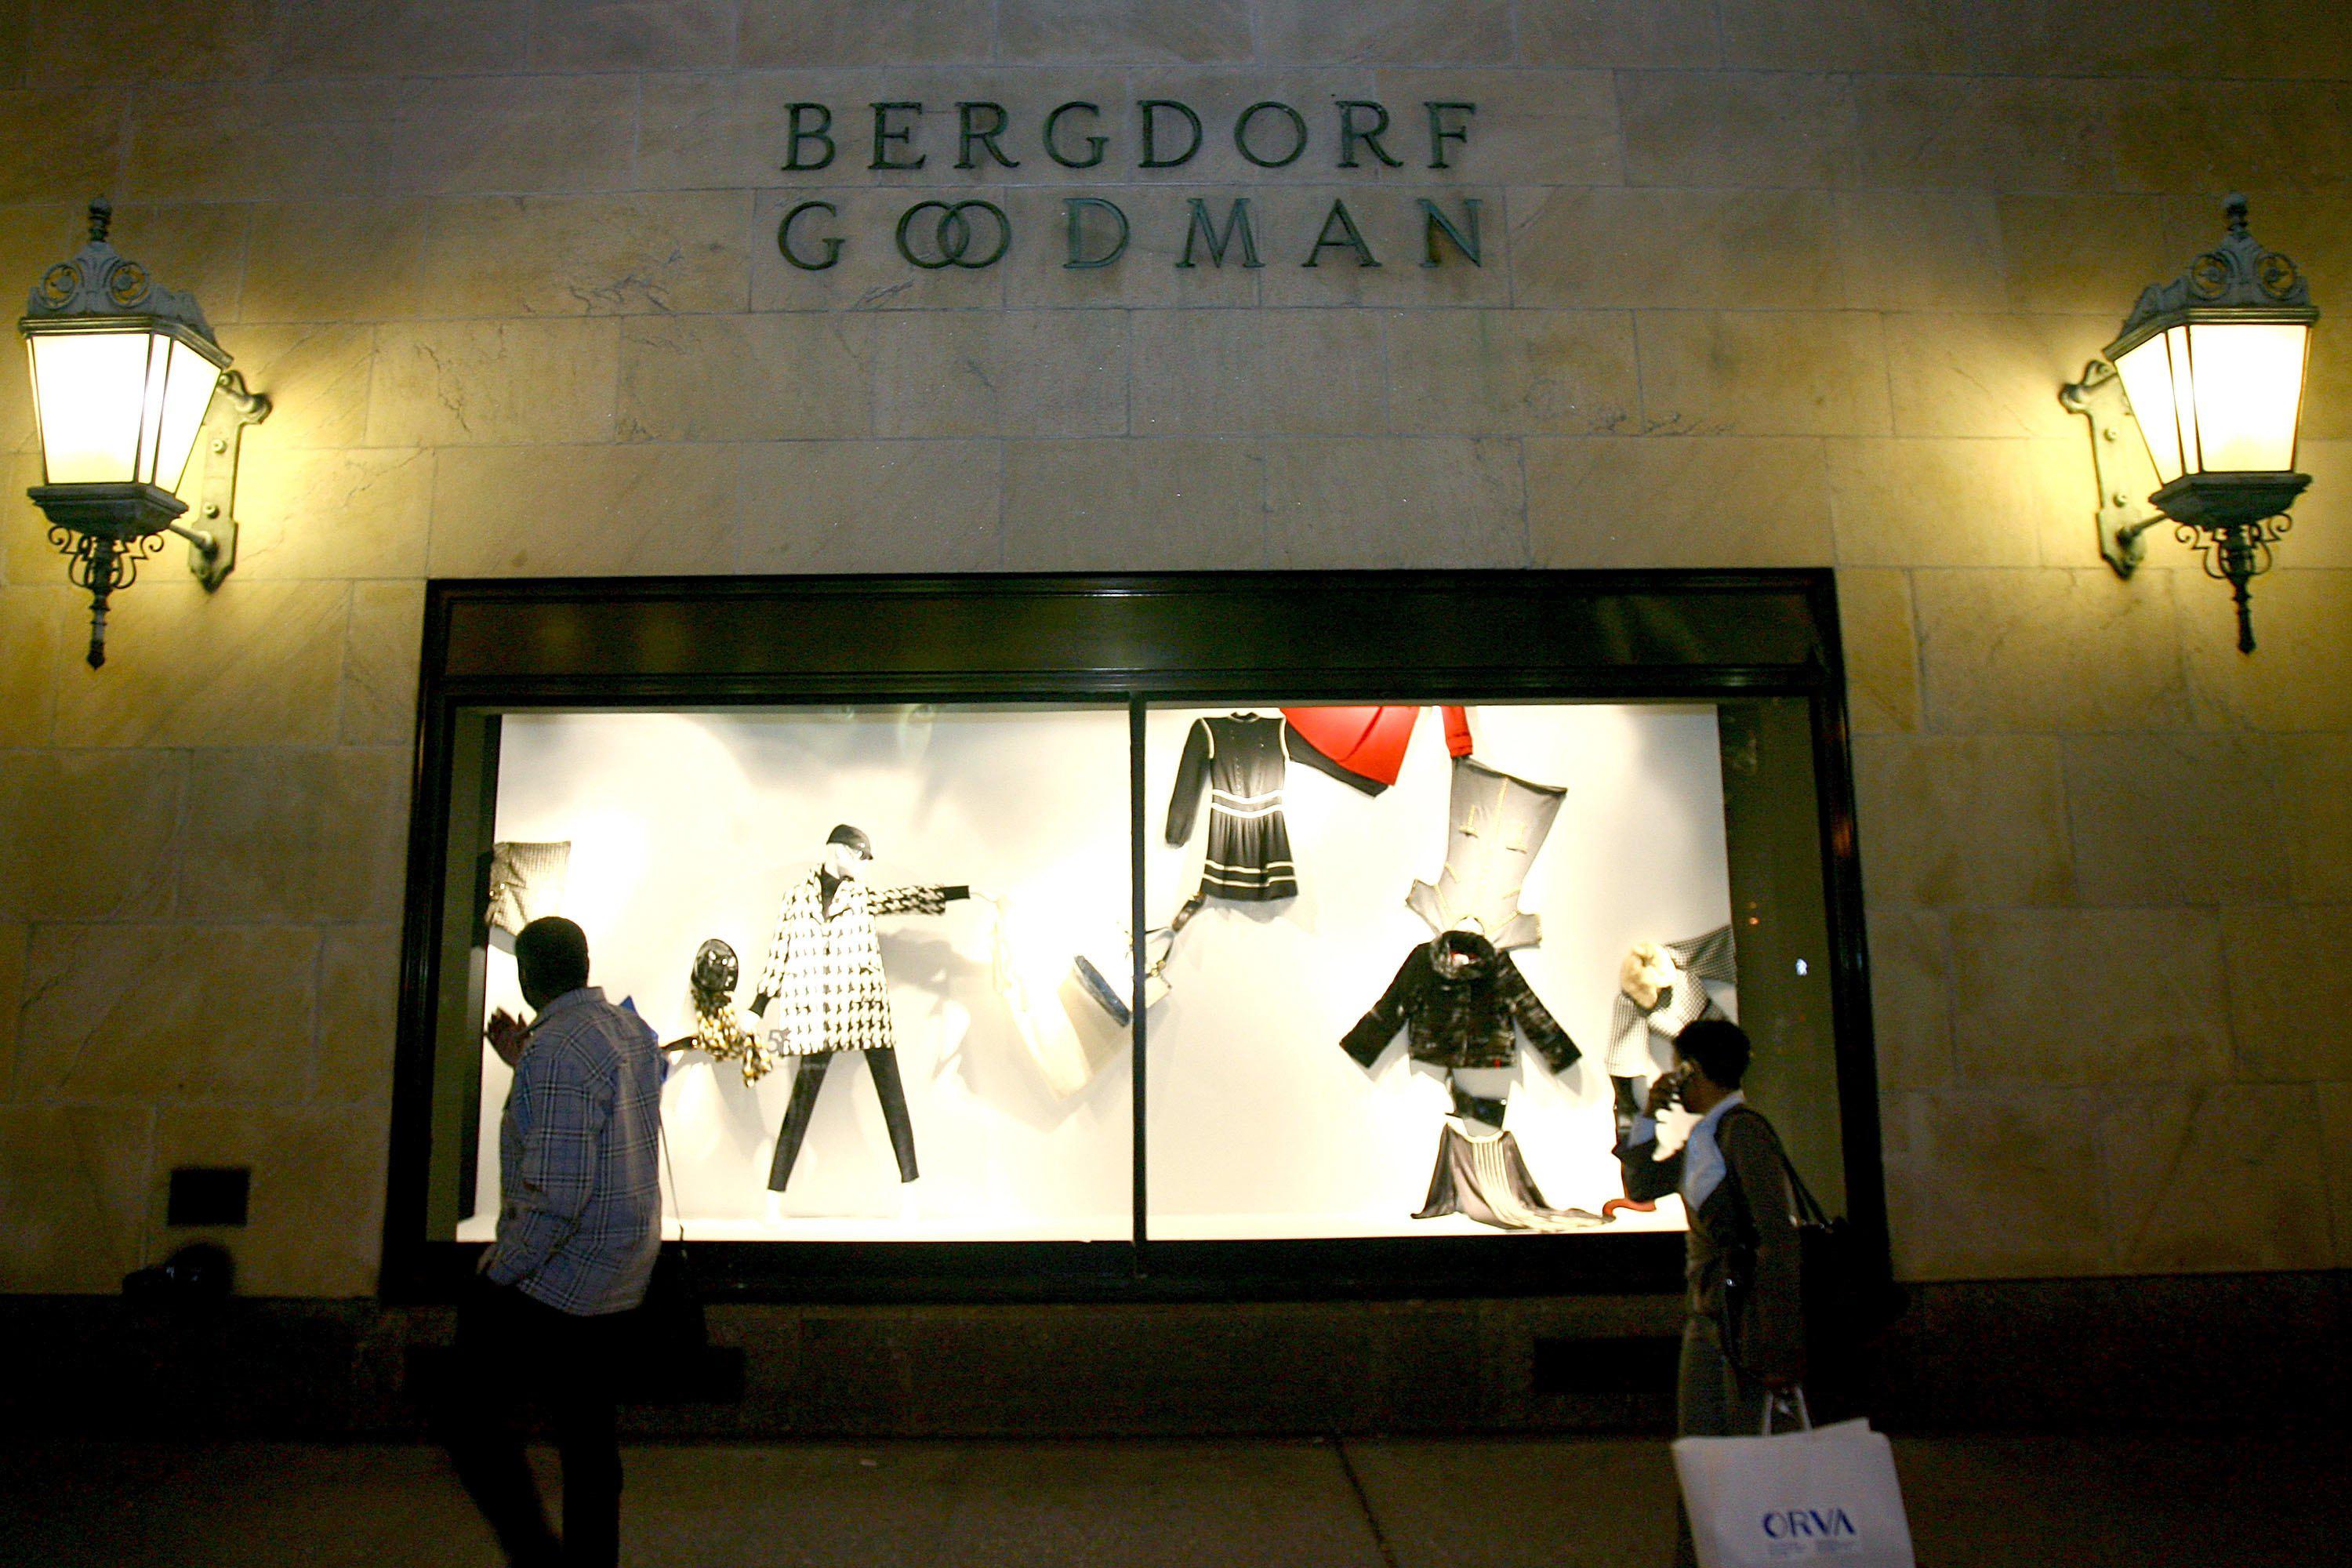 The luxury department store Bergdorf Goodman where E. Jean Carroll says Donald Trump sexually assaulted her in the mid-1990s.